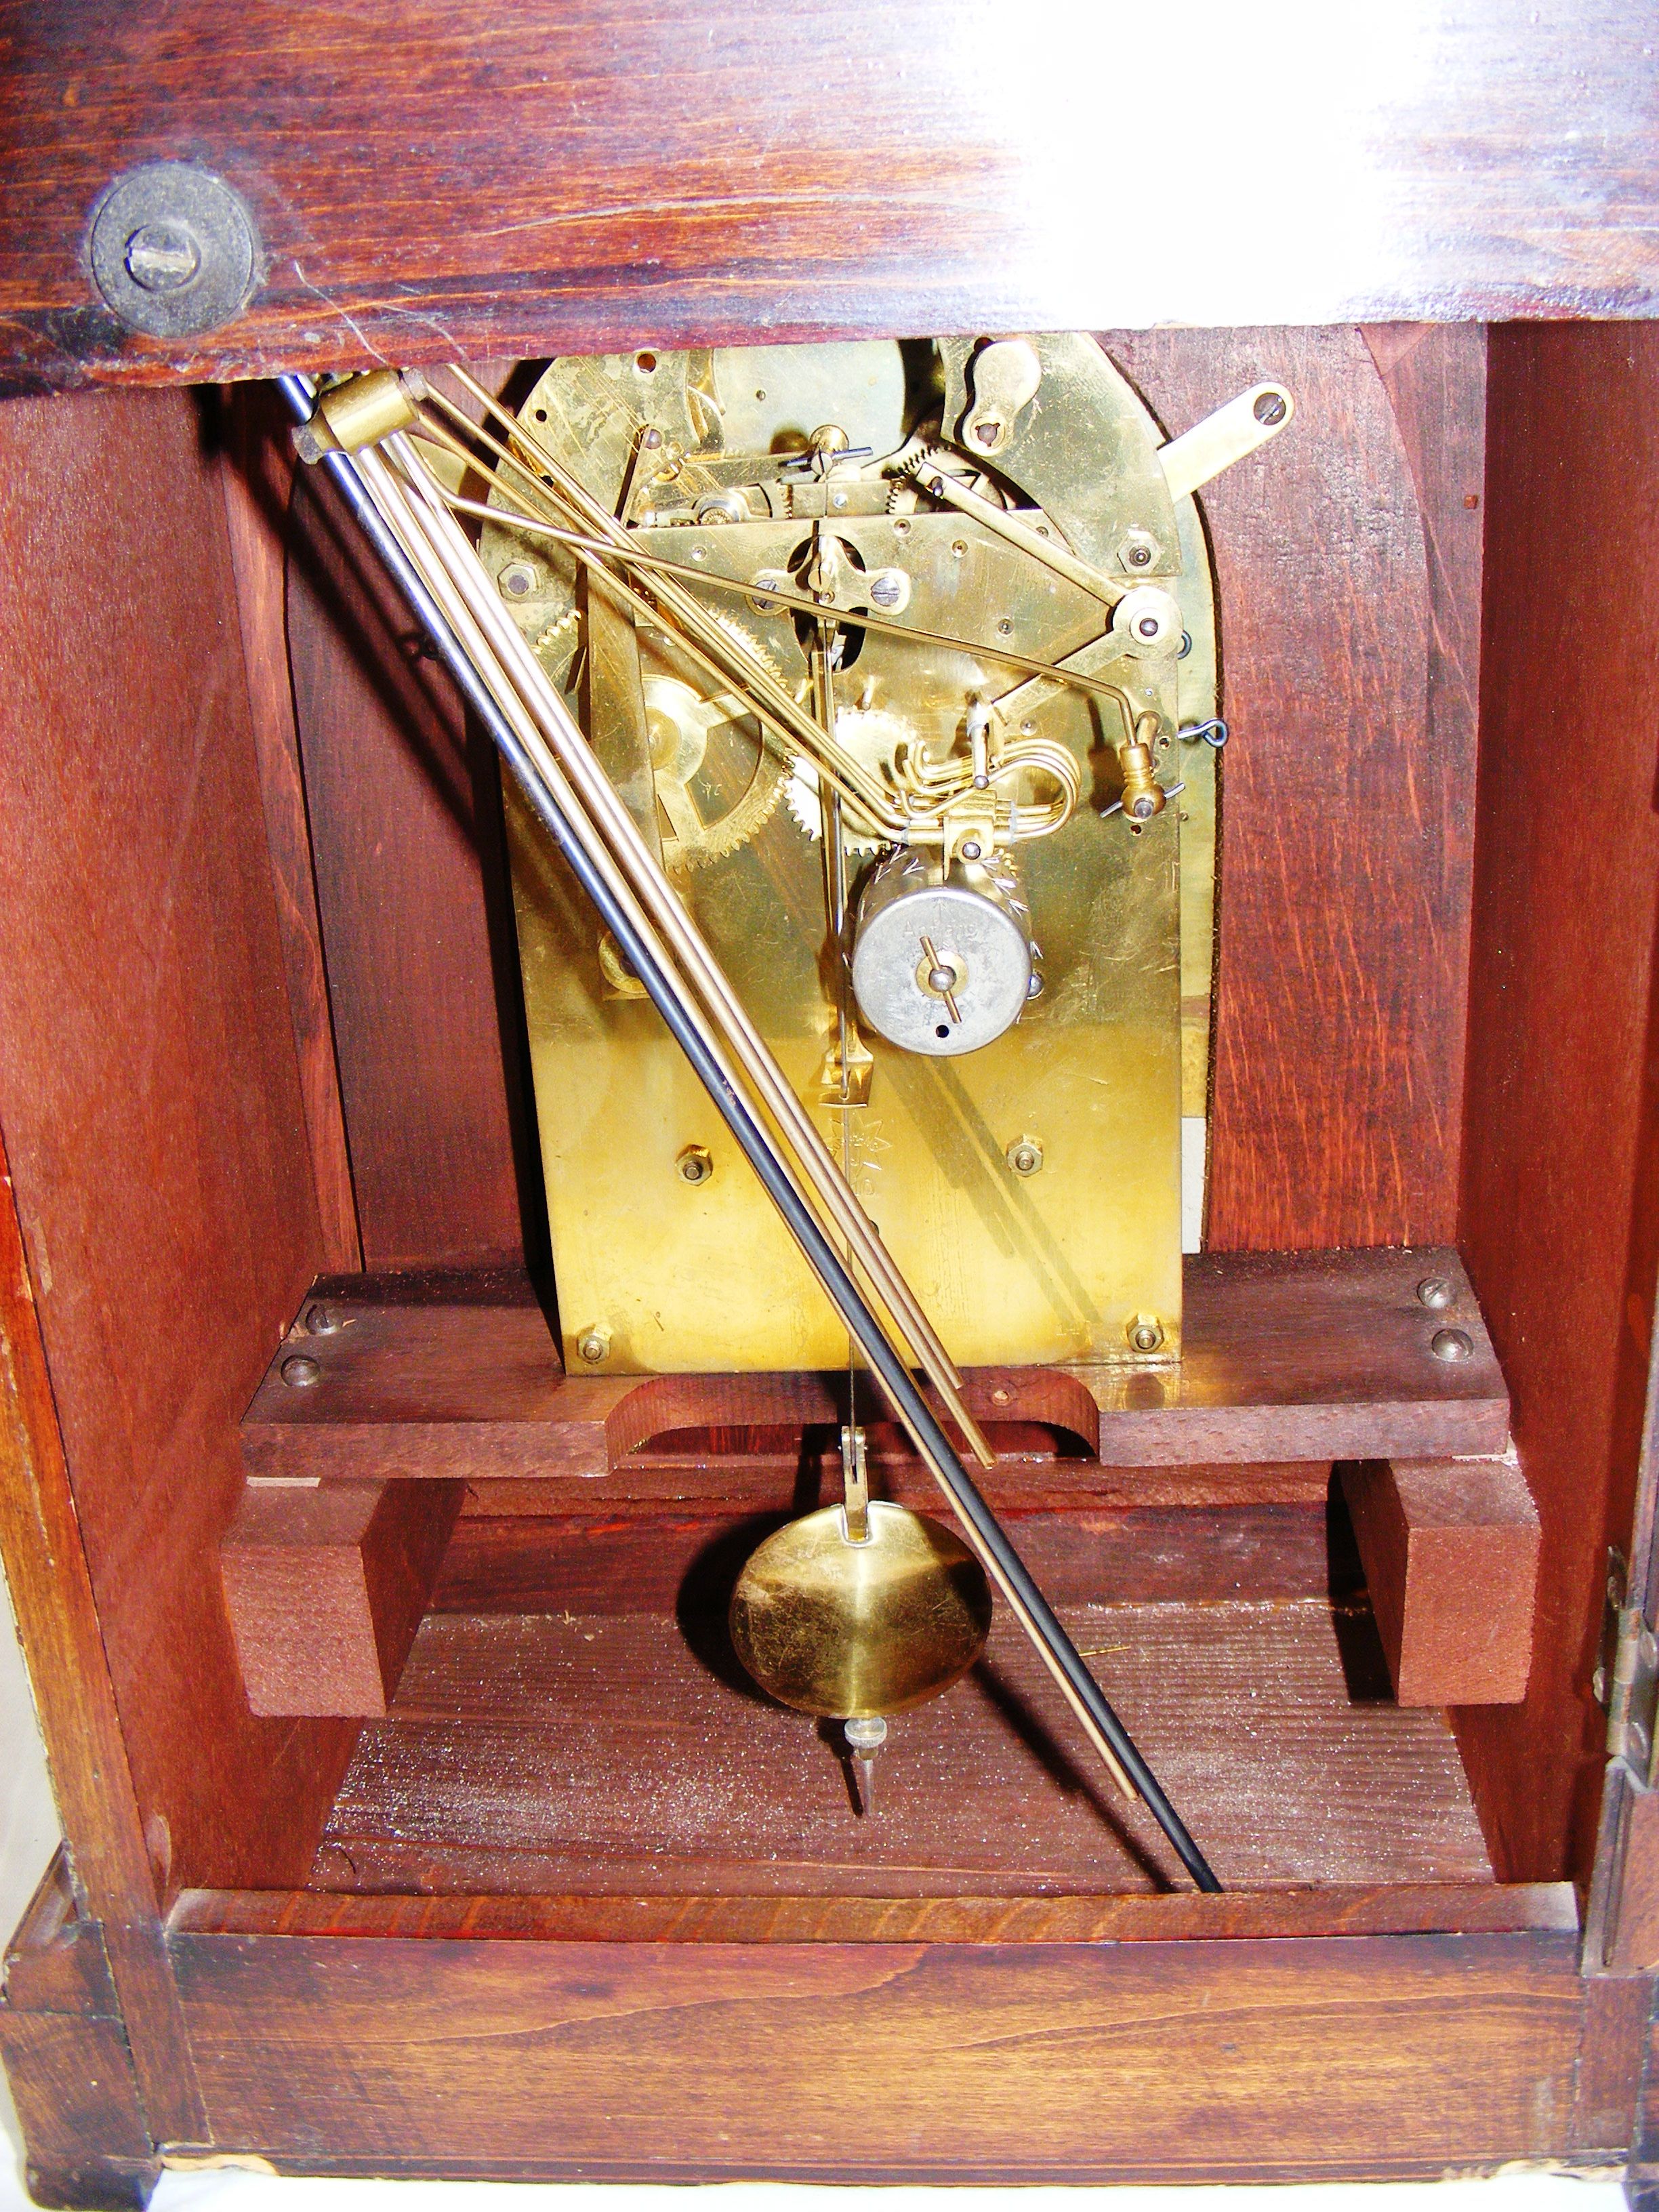 A Junghans B10 movement quarter Westminster chime mahogany cased bracket clock measuring 17" tall. - Image 3 of 3